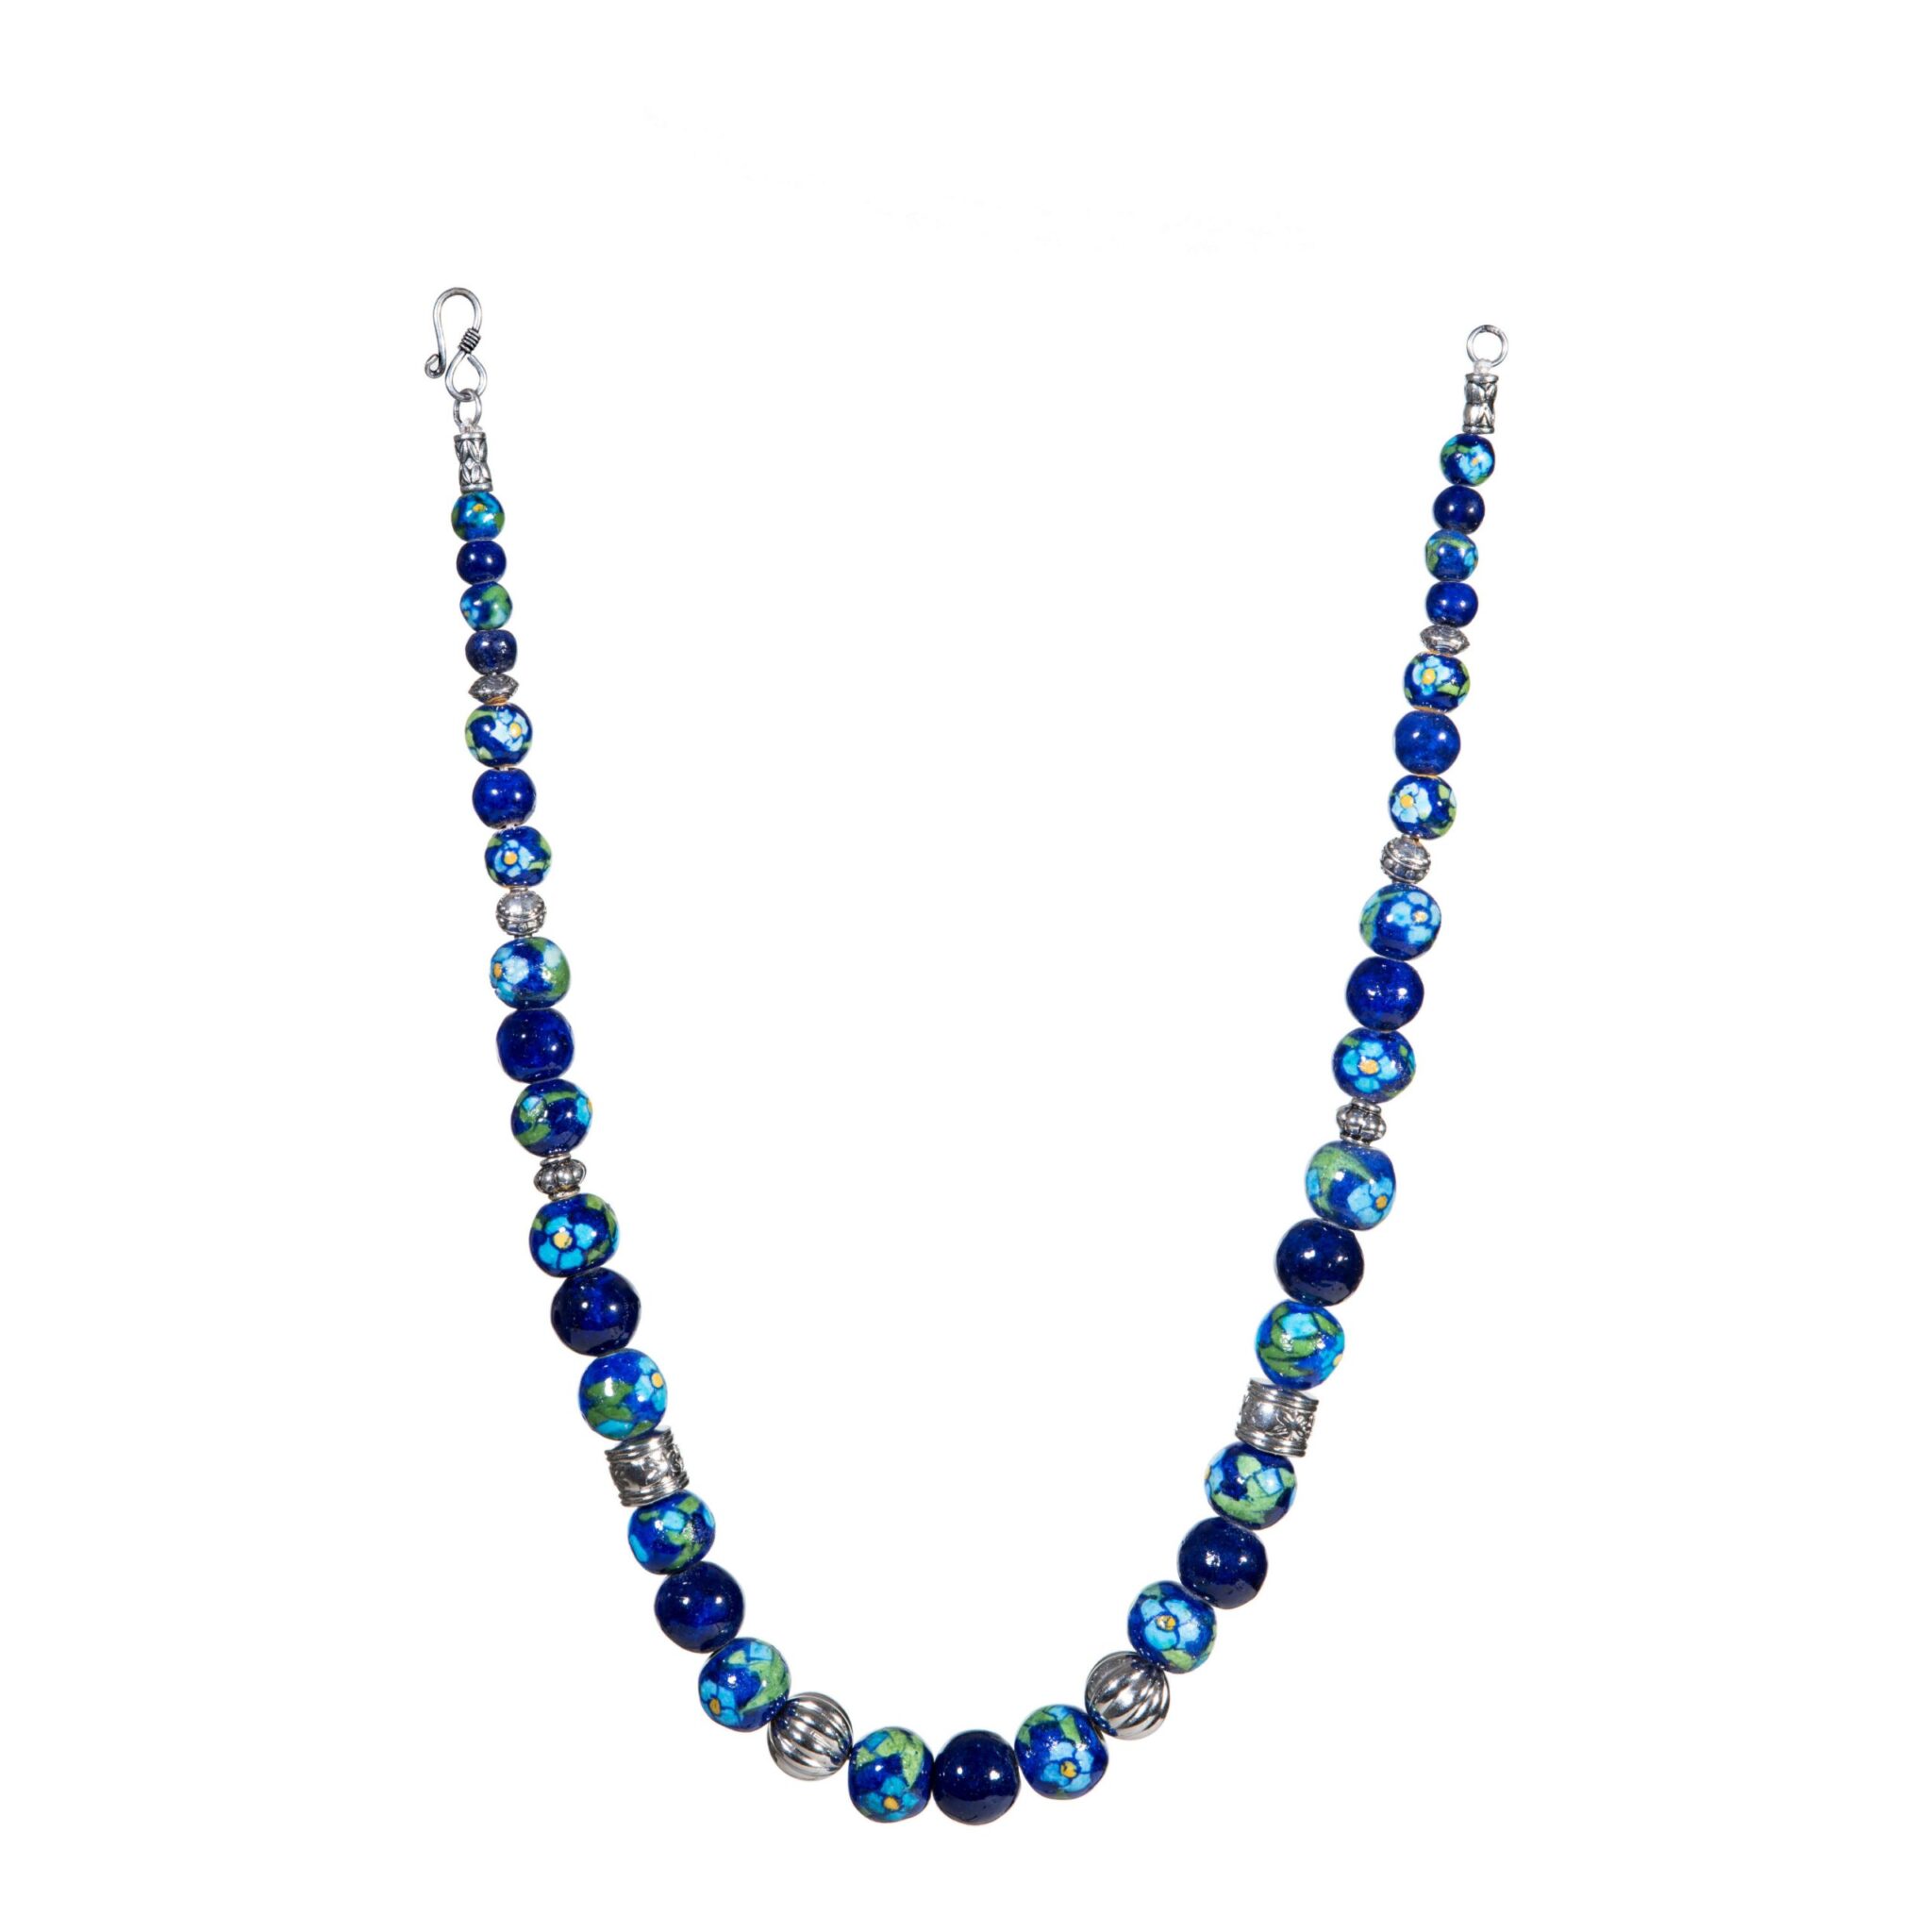 Full Bead Necklace - Blue